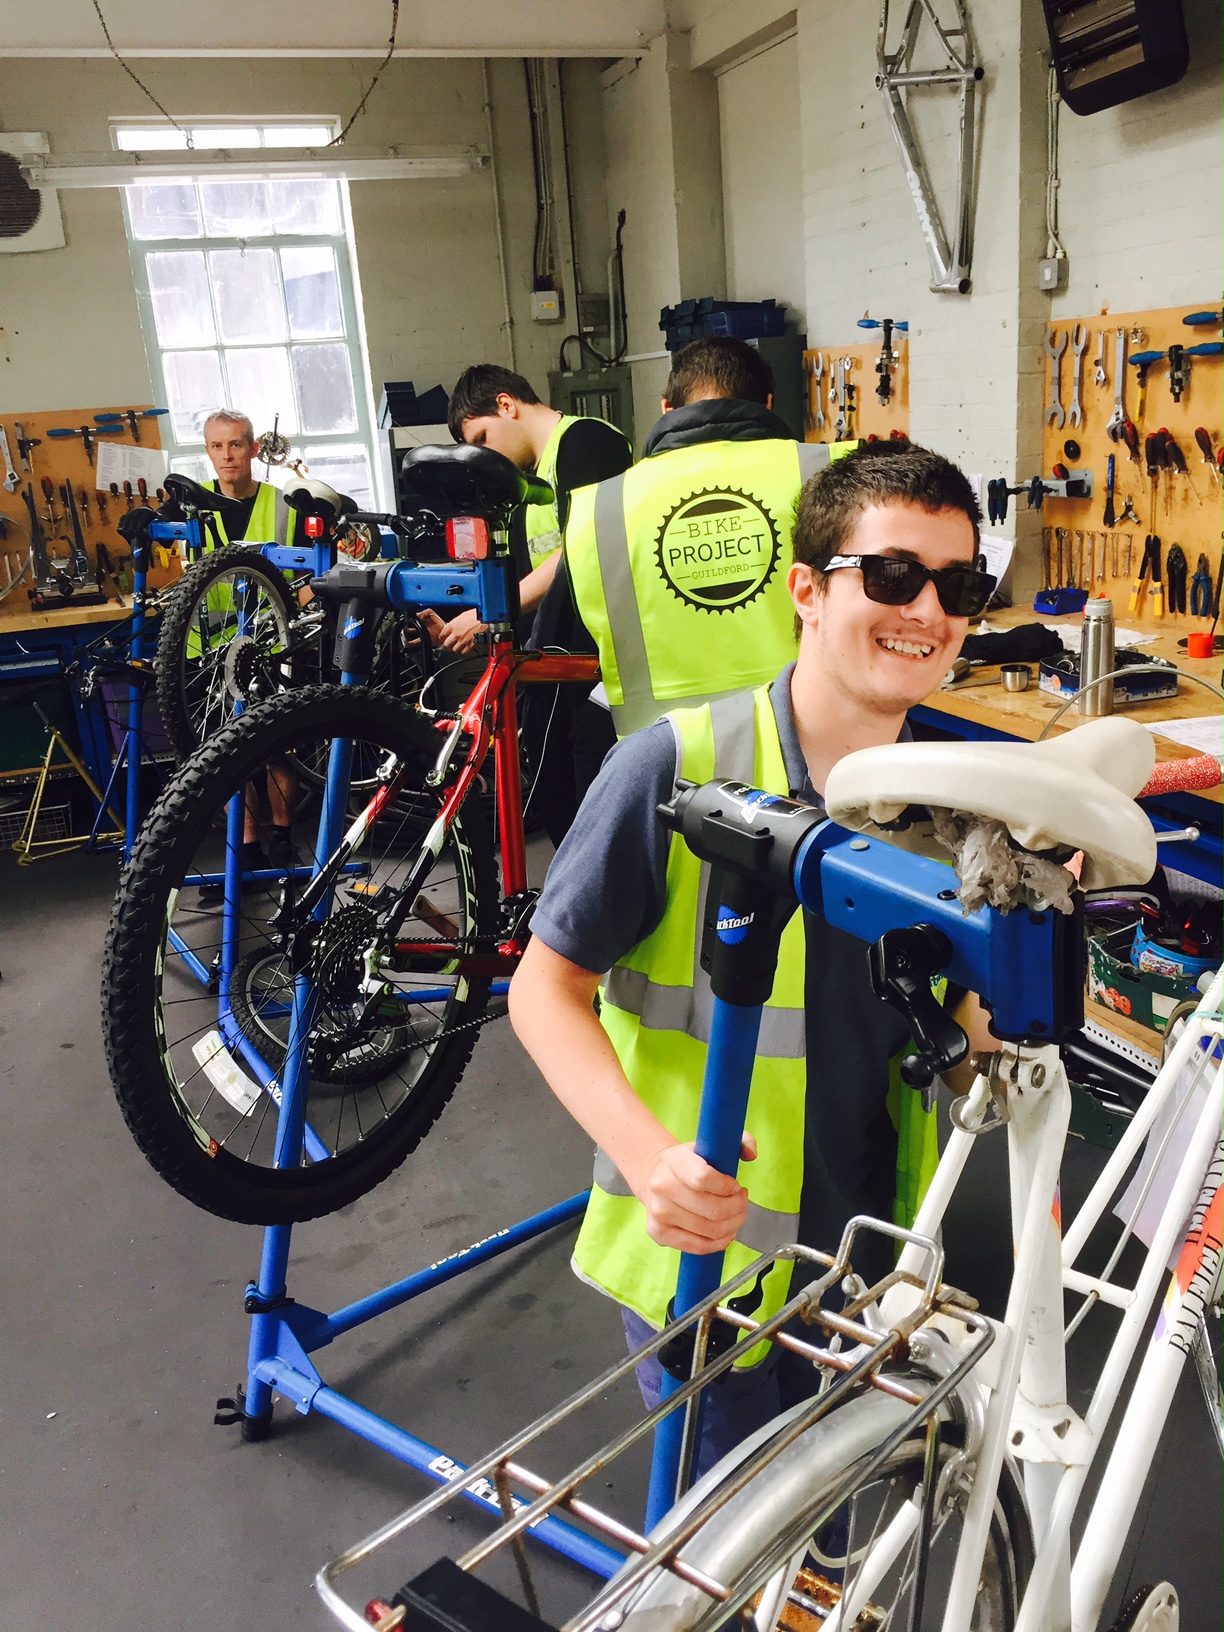 Three bike project students maintaining bicycles in the workshop